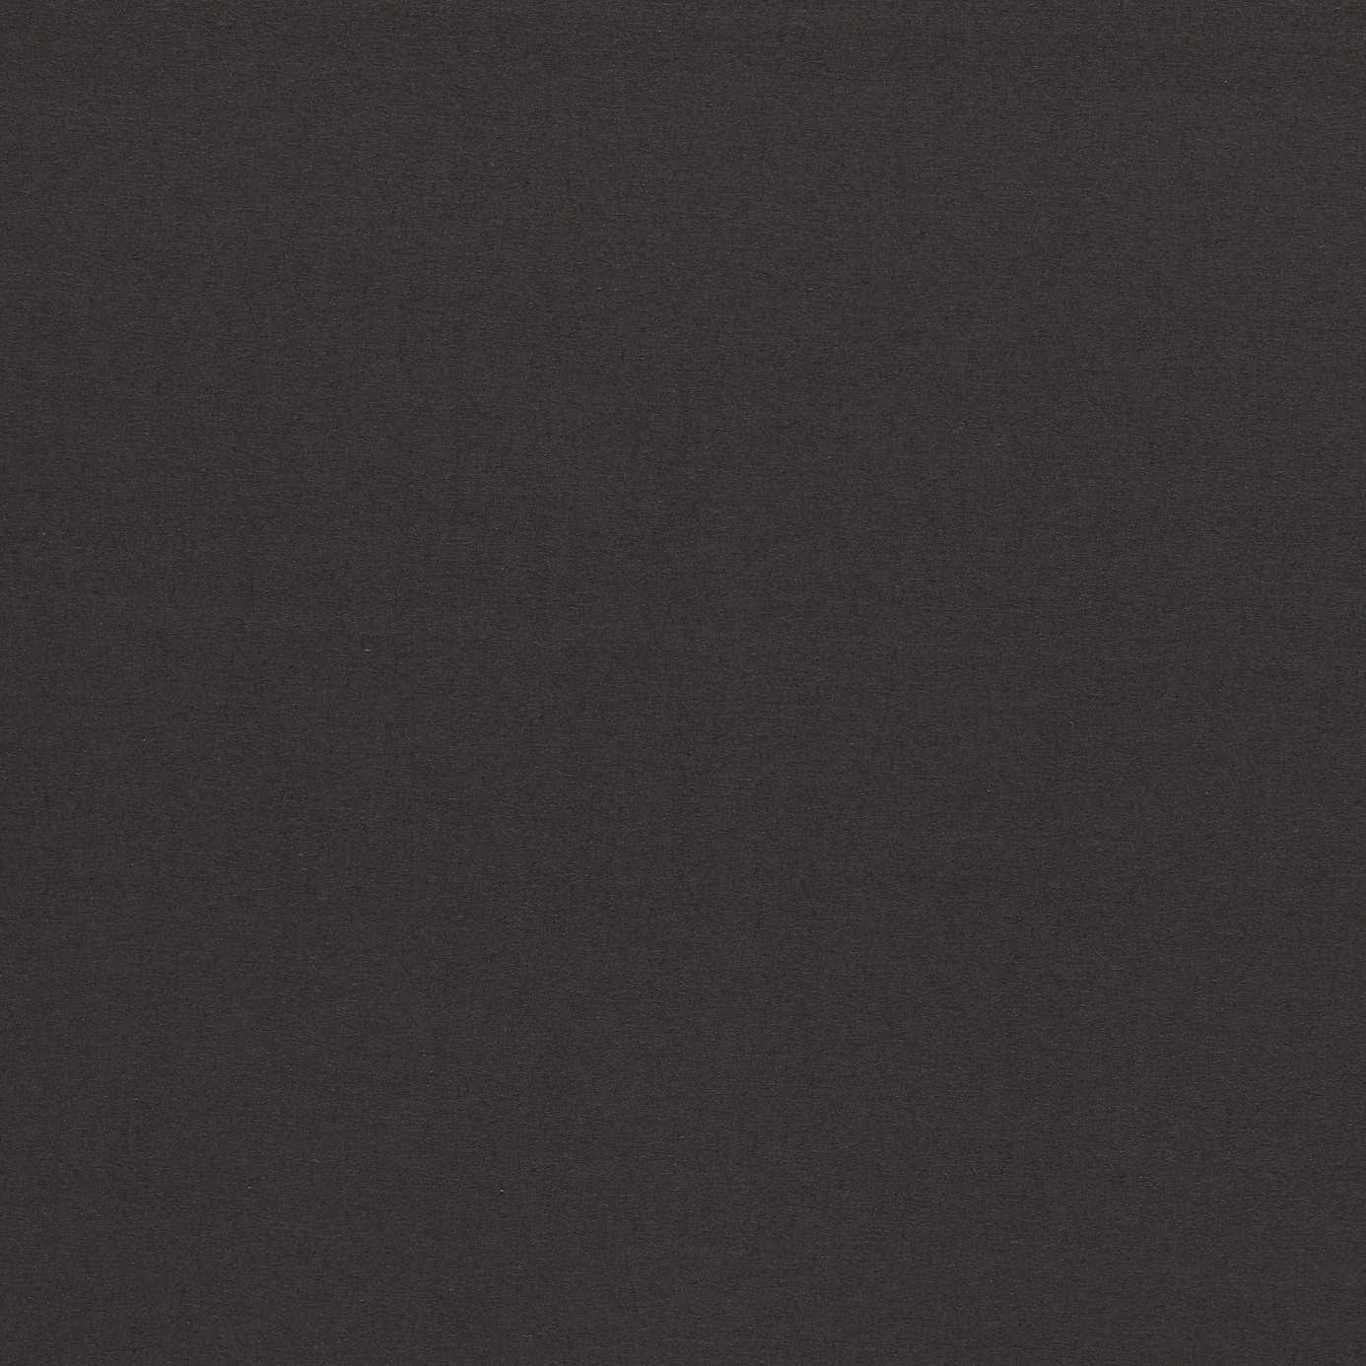 Empower Plain Fabric by Harlequin - HMOC133620 - Black Earth